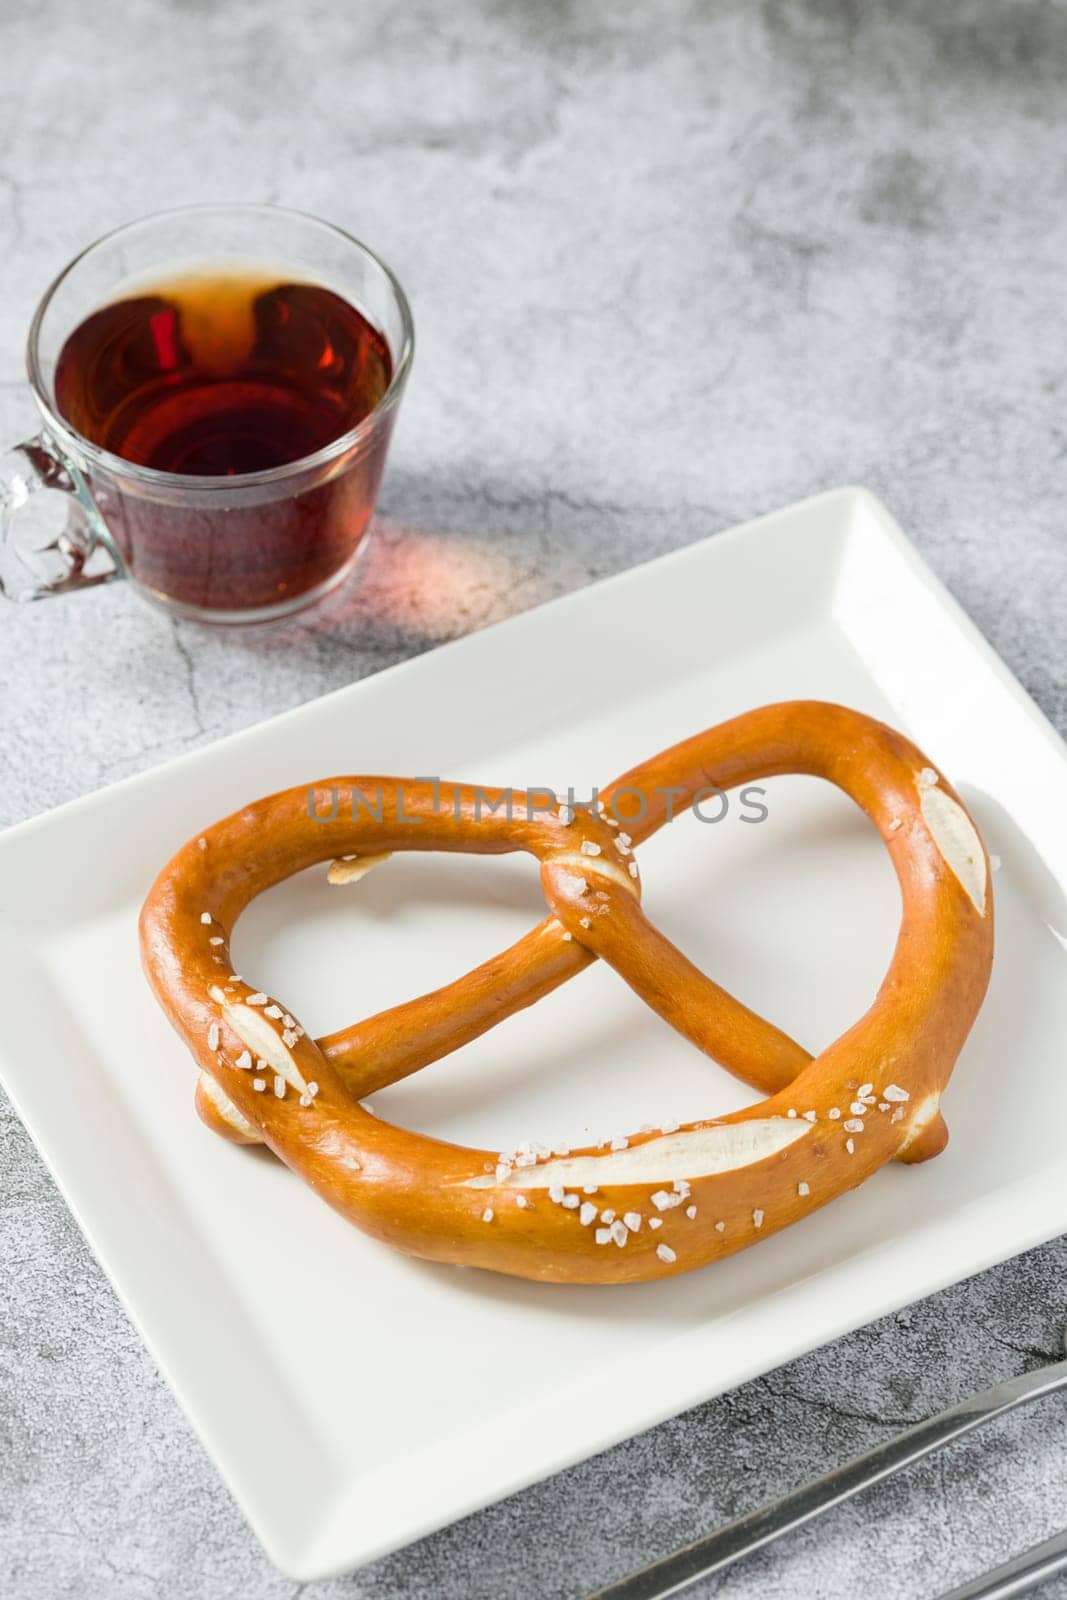 Pretzel in white porcelain plate on stone background by Sonat